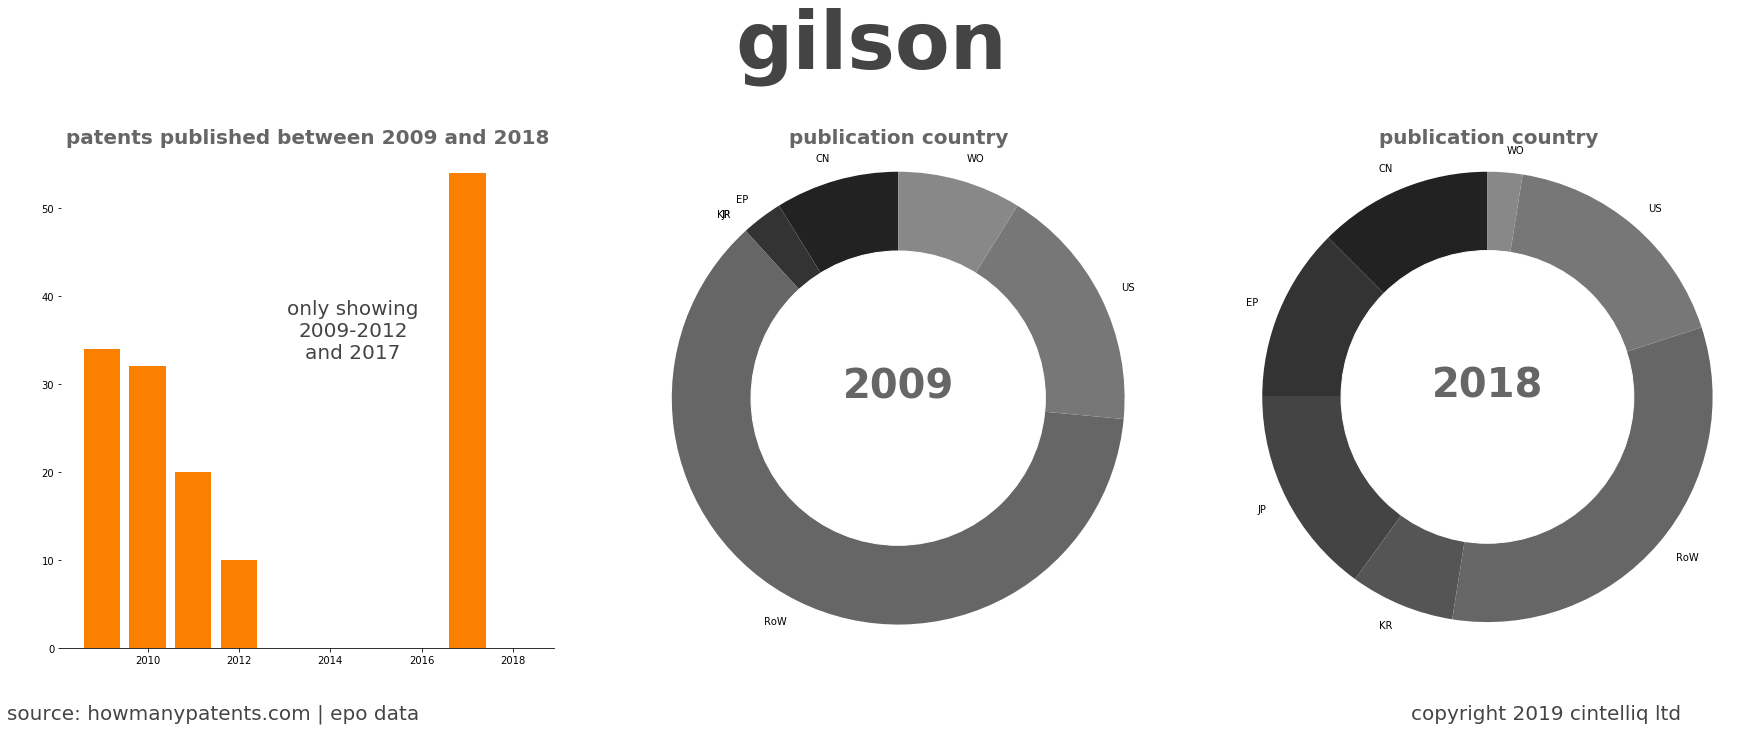 summary of patents for Gilson